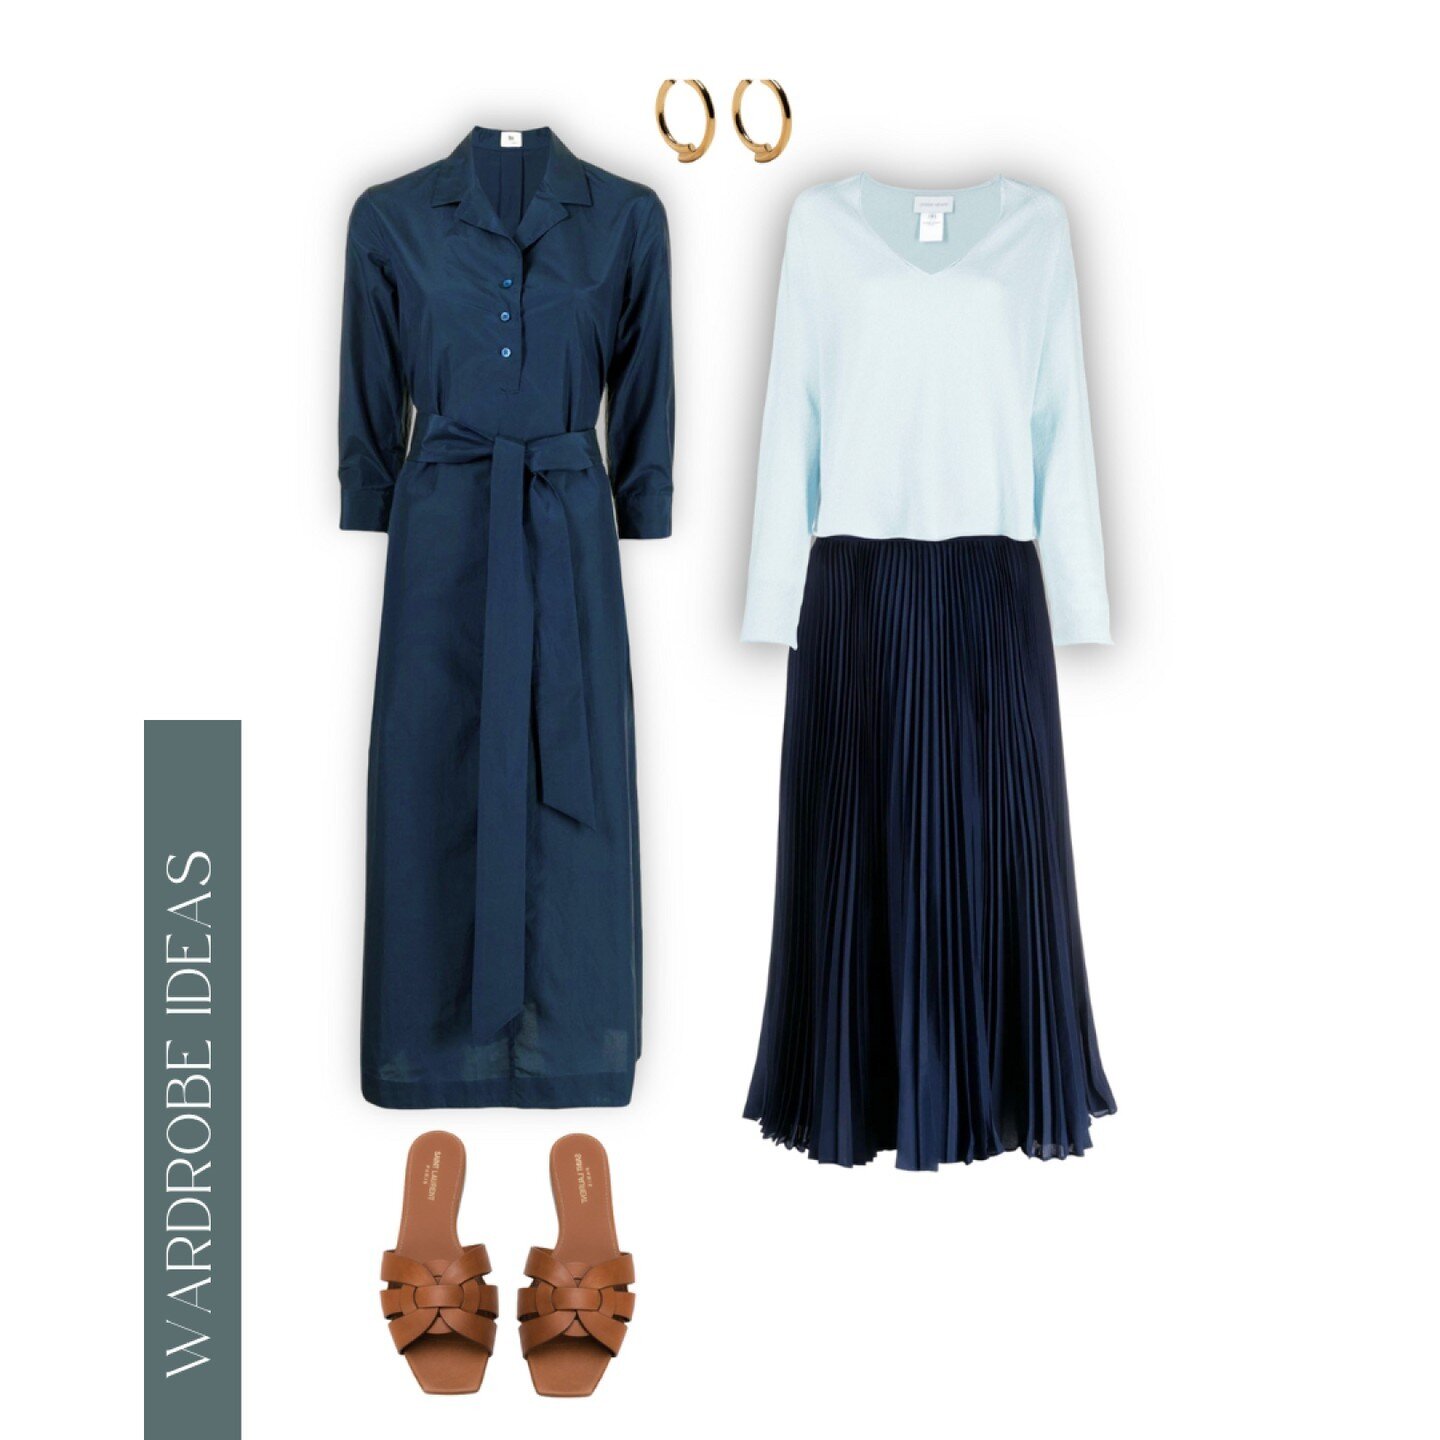 SMART CASUAL
If you have a feminine feel to your brand then try thin flowing dresses and a more feminine knit. Wearing a shirt dress gives a smart casual look, without looking too corporate. Choose simple sandals or white sneakers to round out the lo